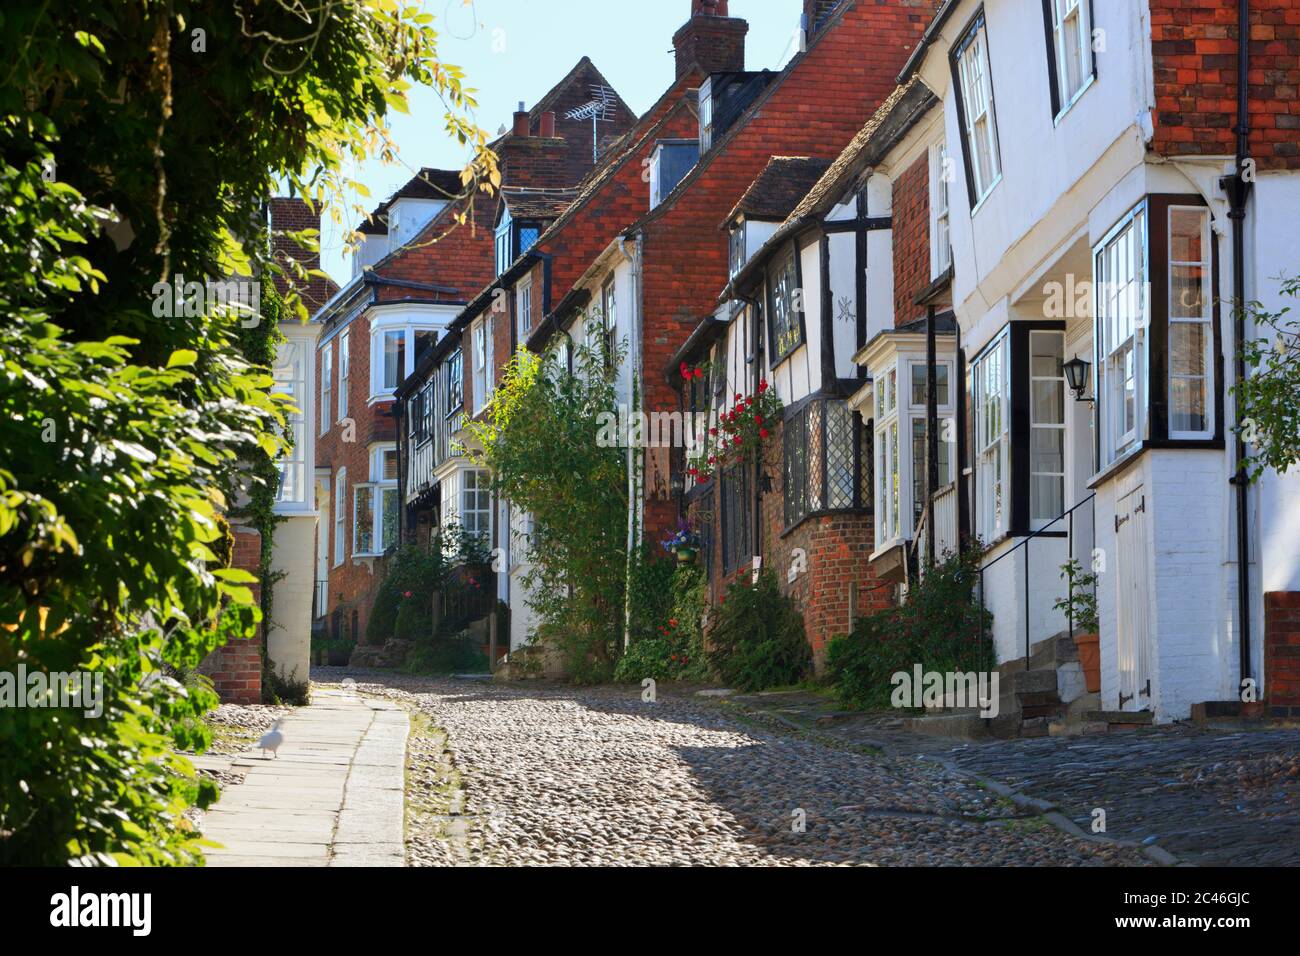 Old houses and cobbled street along Mermaid Street, Rye, East Sussex, England, United Kingdom, Europe Stock Photo